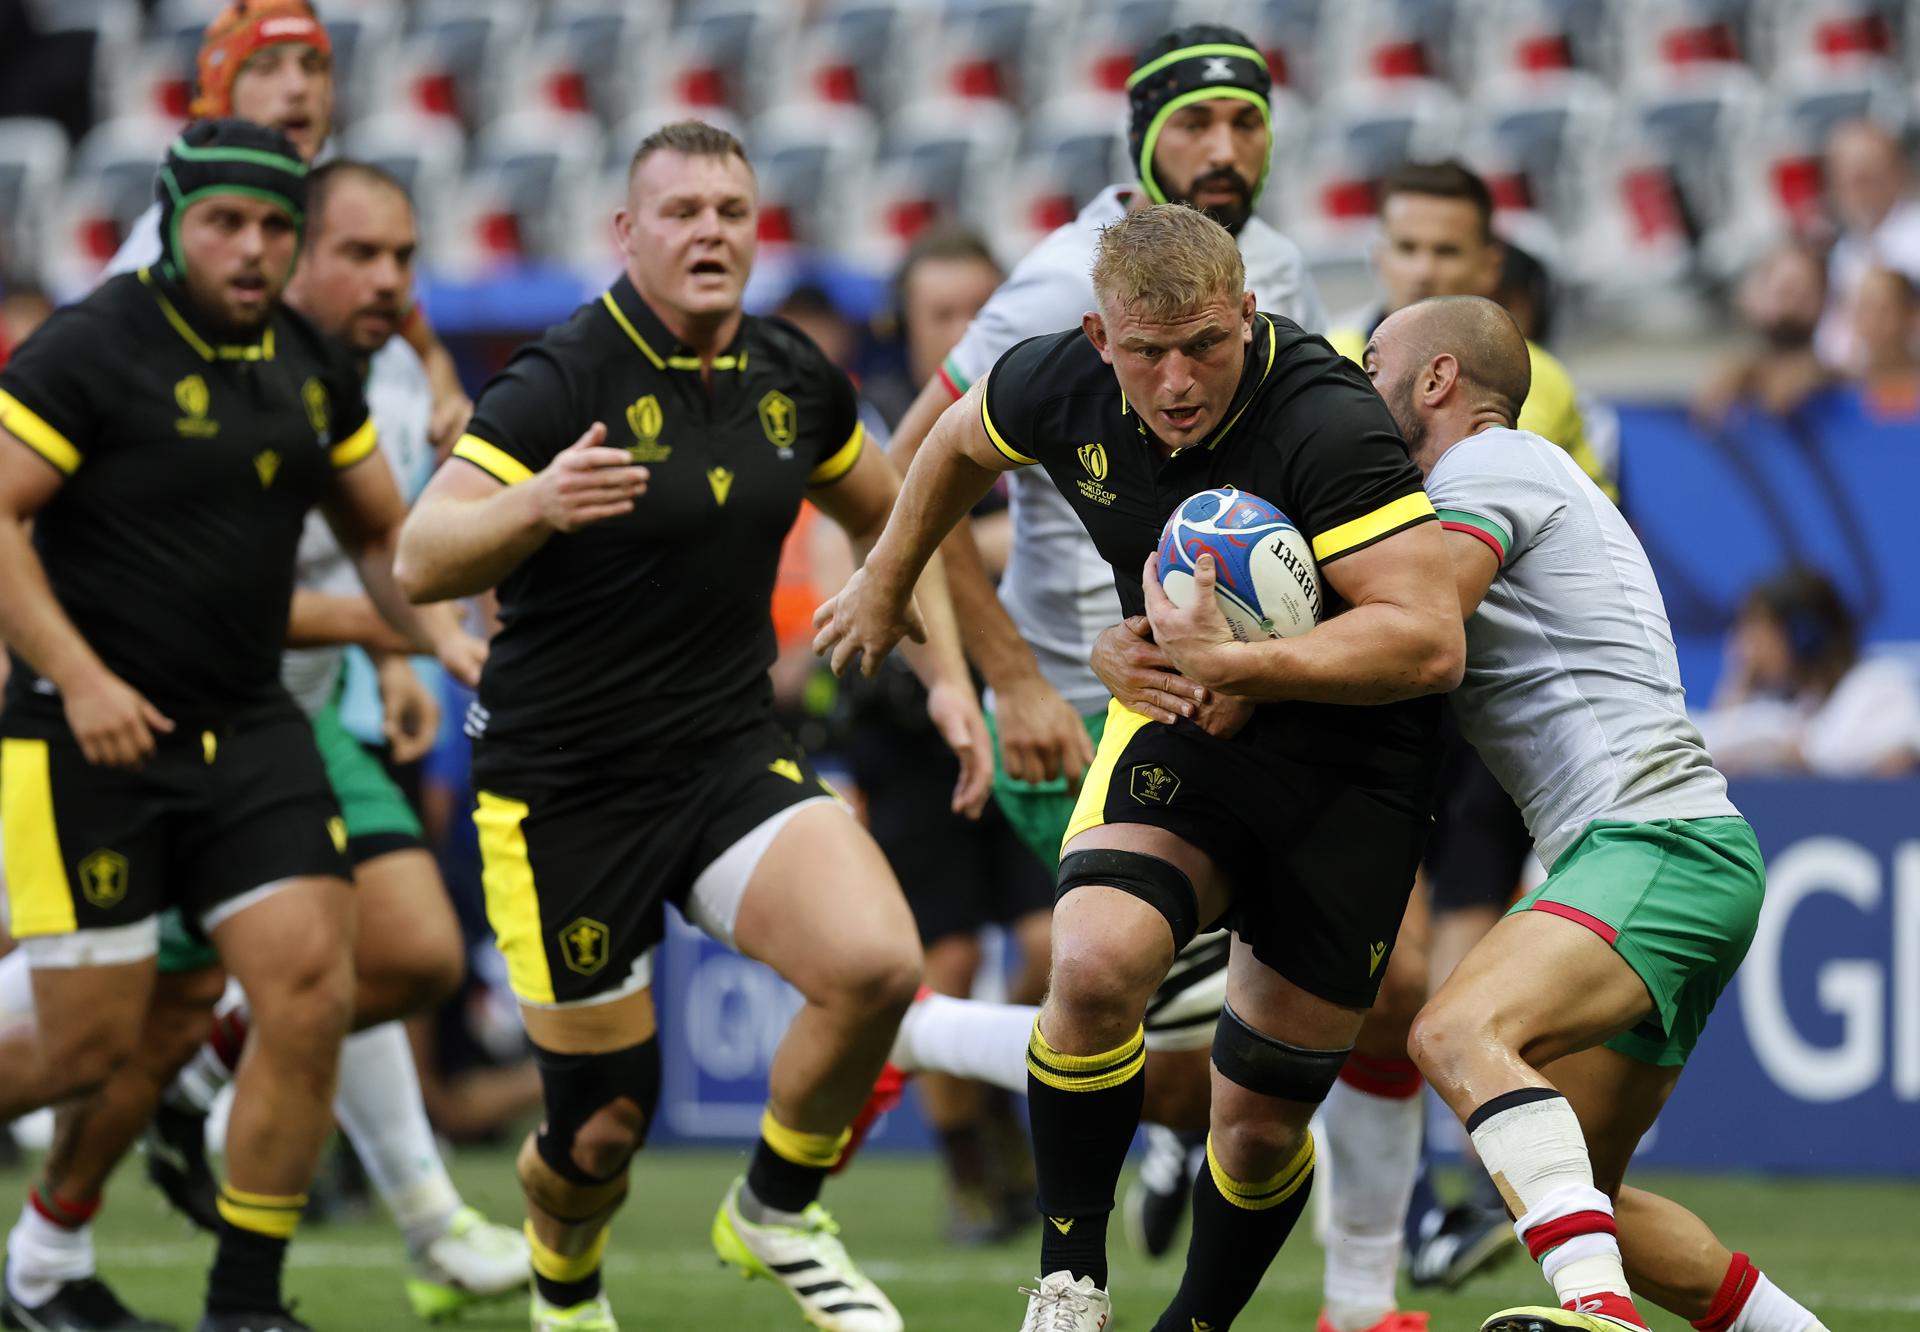 Wales's Dewi Lake in action during the Rugby World Cup 2023 Pool C between Wales and Portugal in Nice, France, 16 September 2023. EFE-EPA/SEBASTIEN NOGIER
